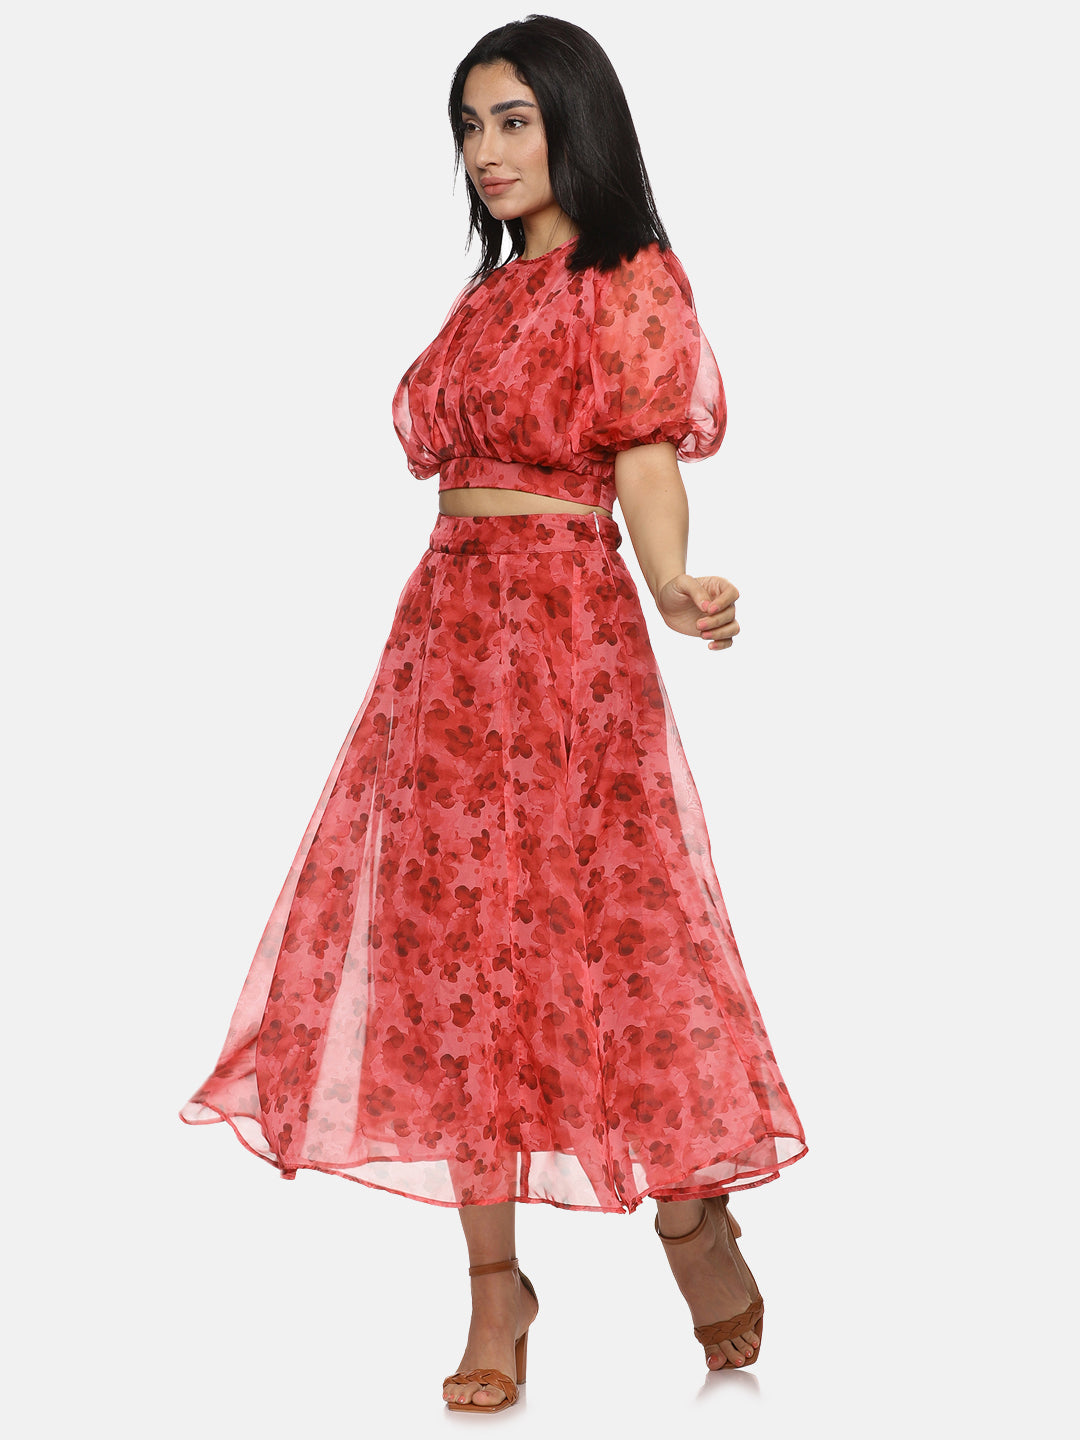 IS.U Floral Red Flared Midaxi Skirt